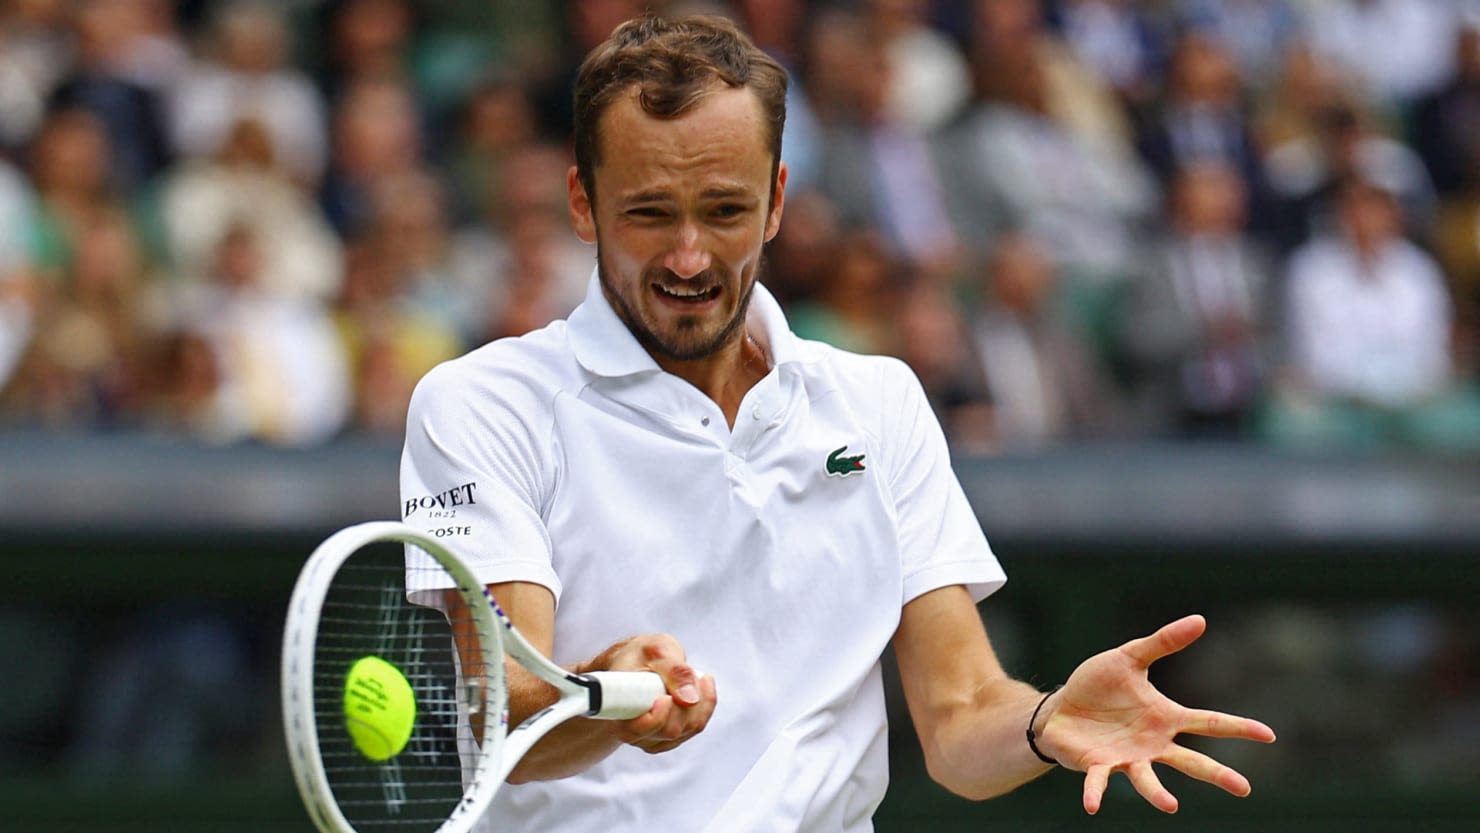 Russian Tennis Star Daniil Medvedev Called Out After Outburst at Wimbledon